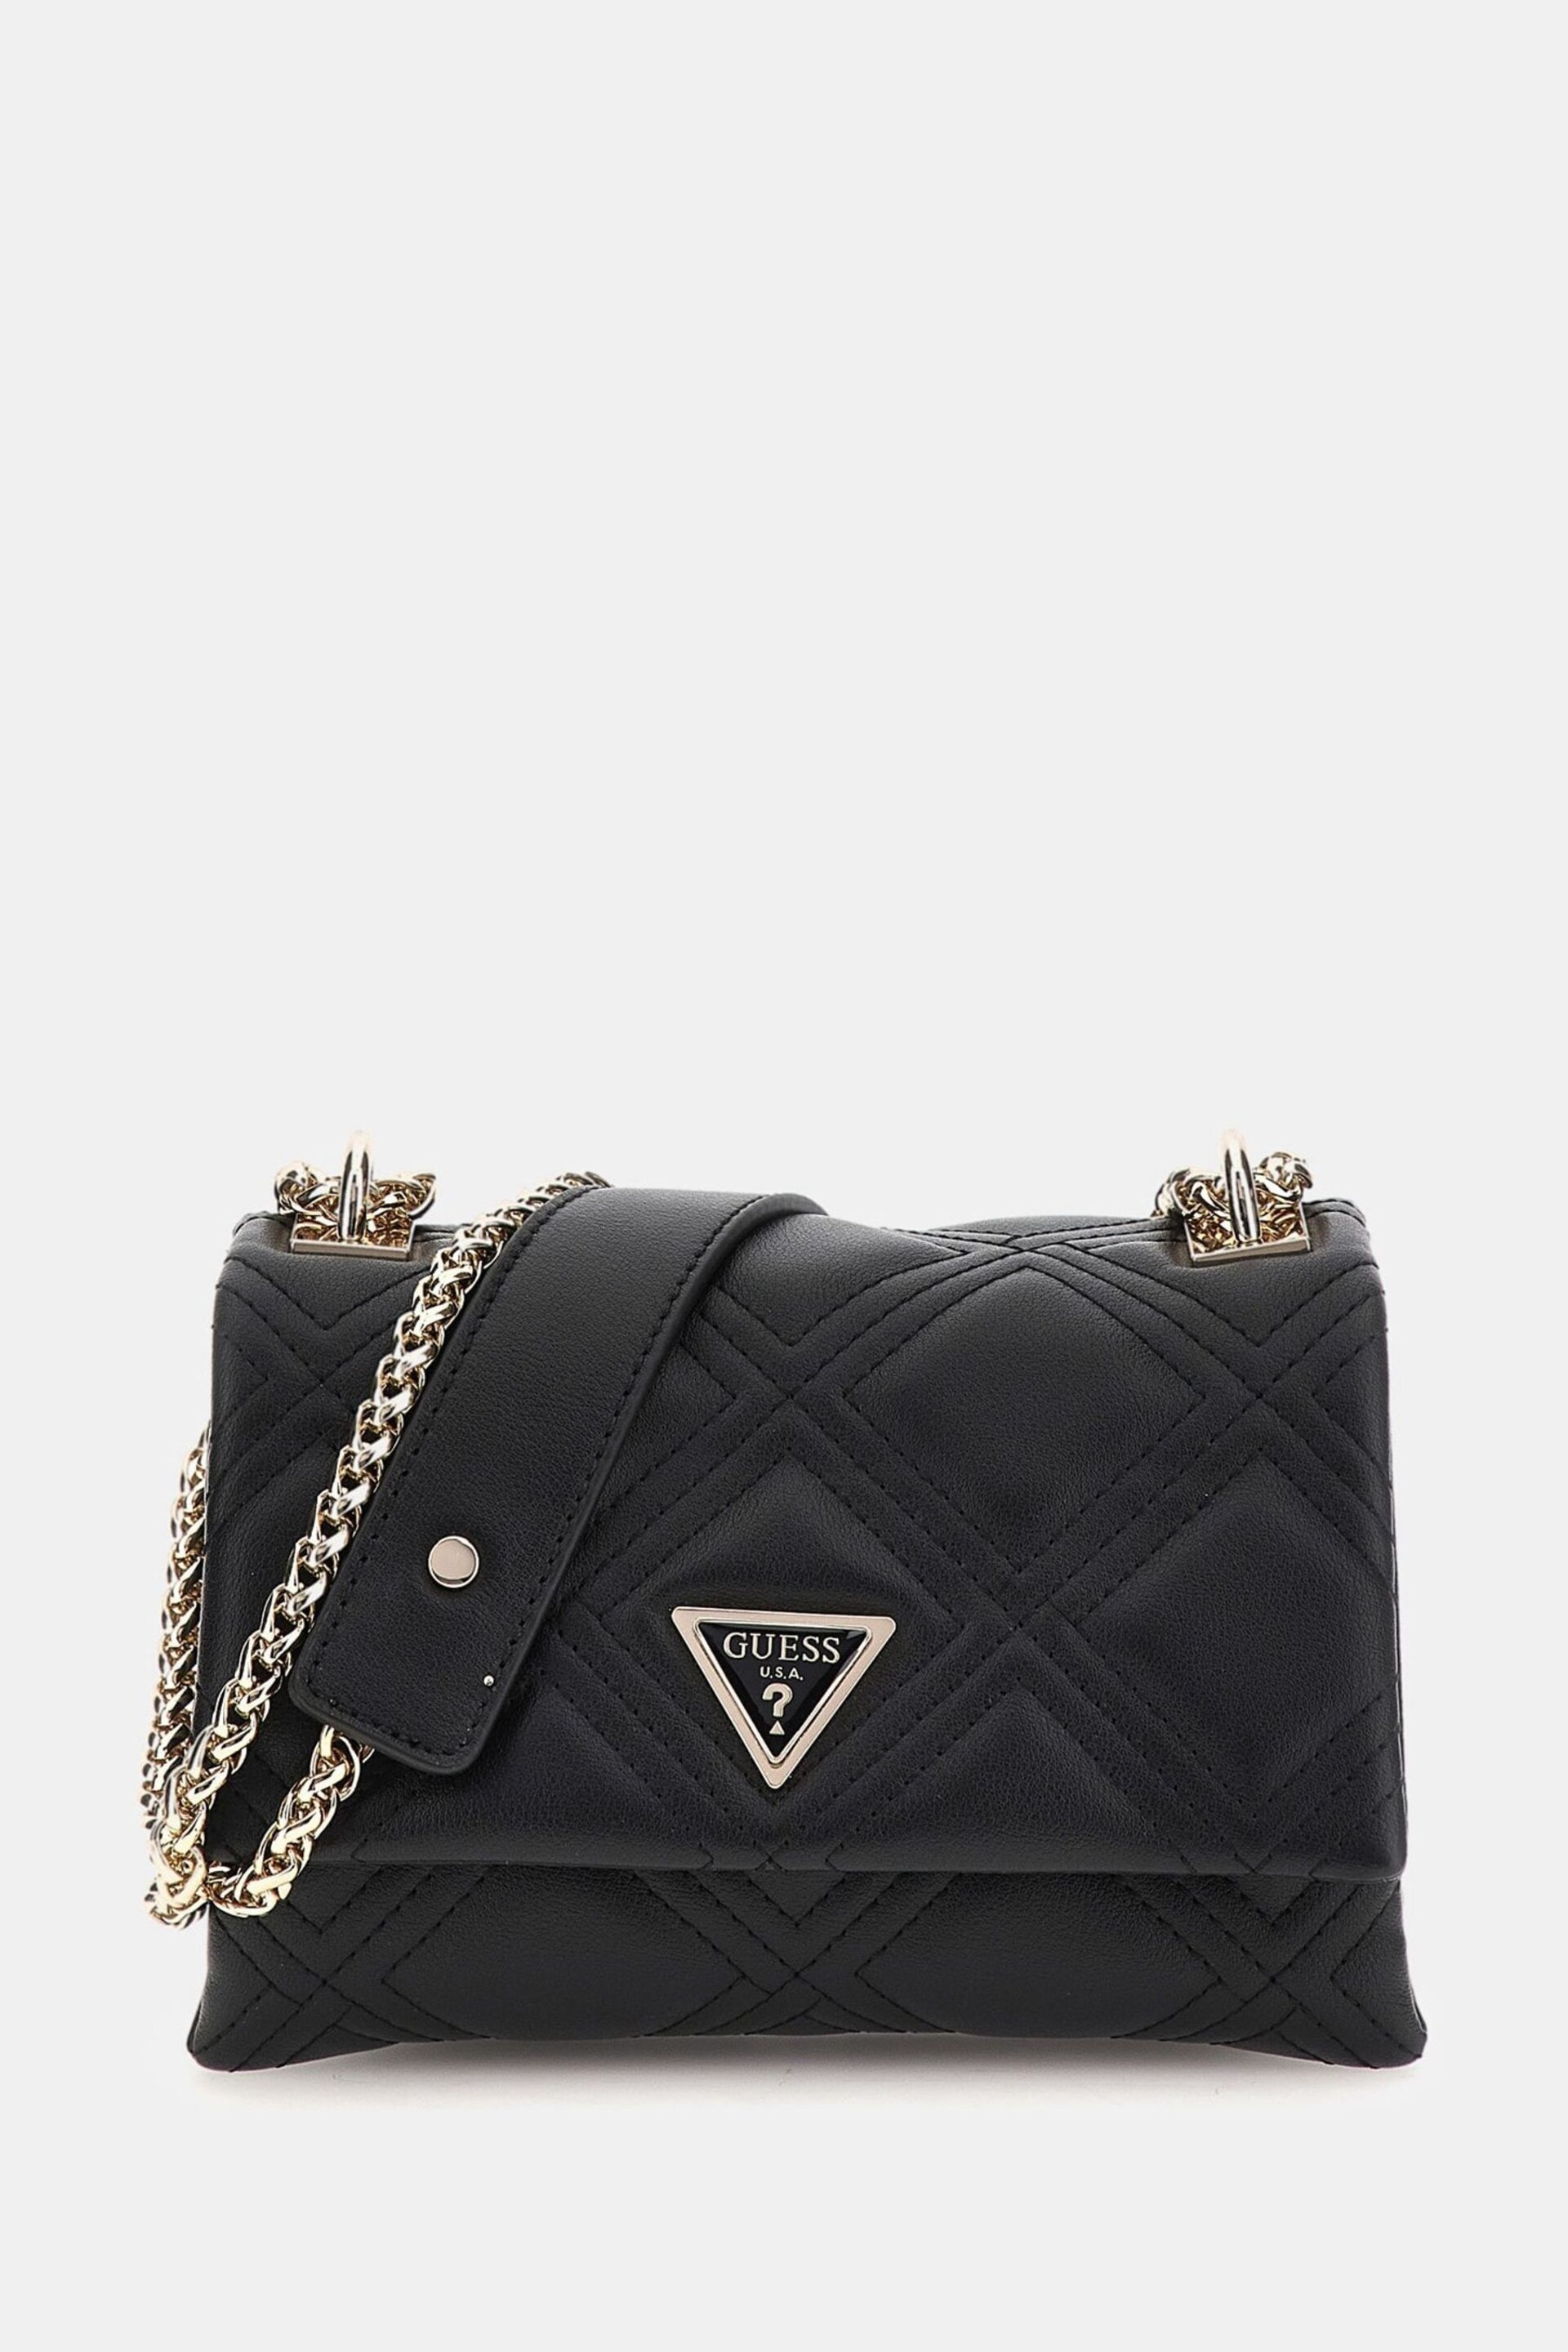 GUESS Black Deesa Quilted Convertible Cross-Body Flap Bag - Image 4 of 5